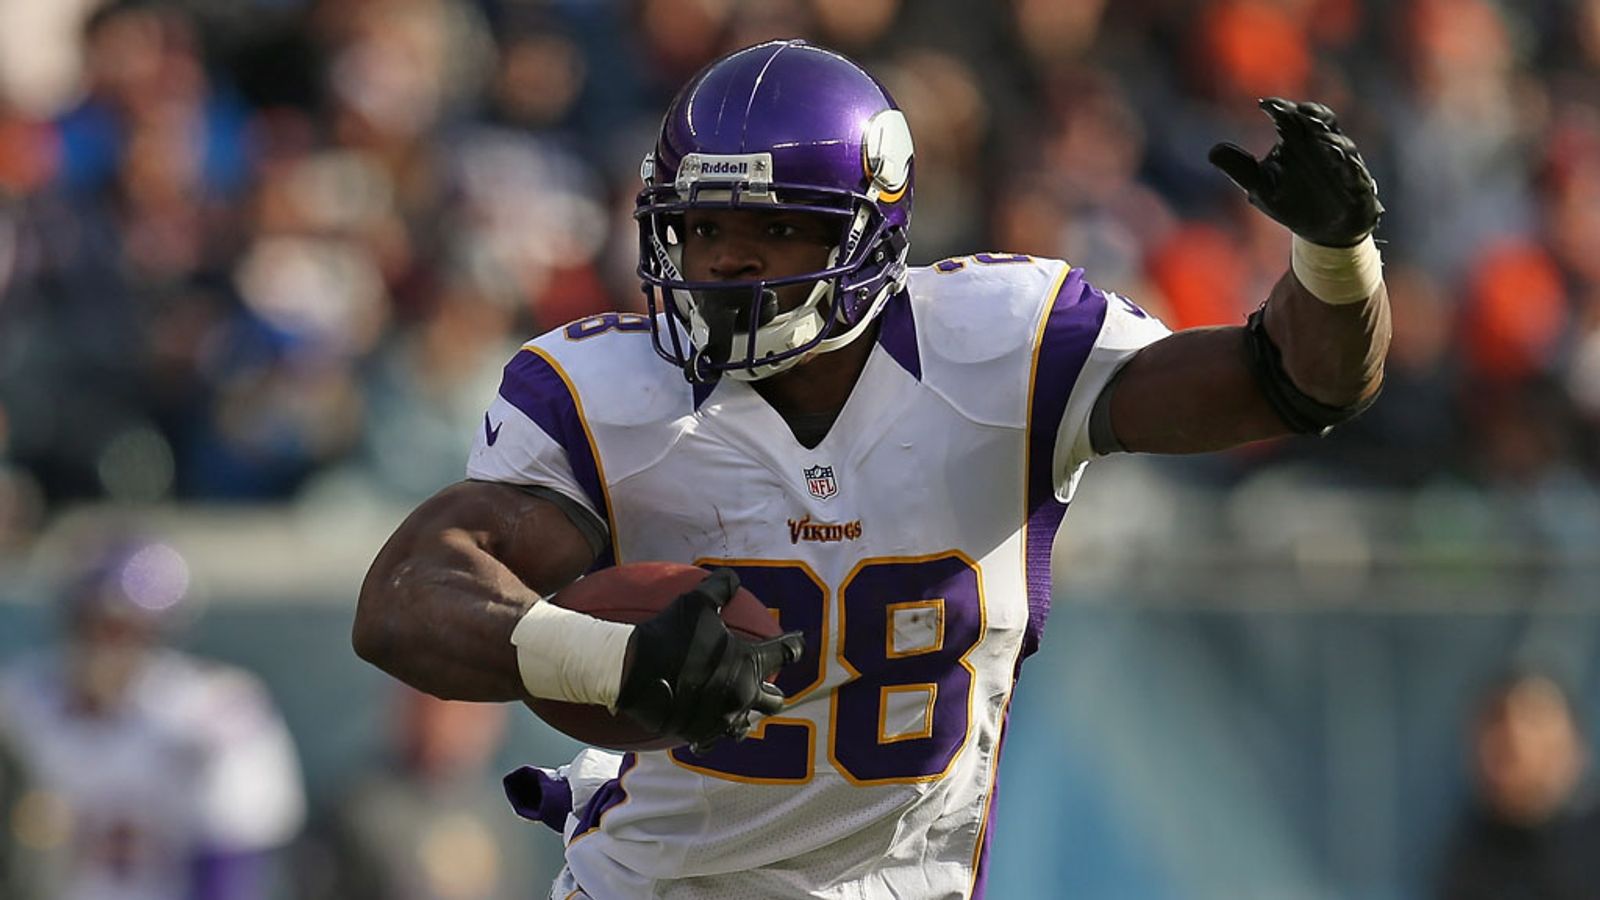 Minnesota Vikings running back Adrian Peterson reinstated by NFL - Newsday